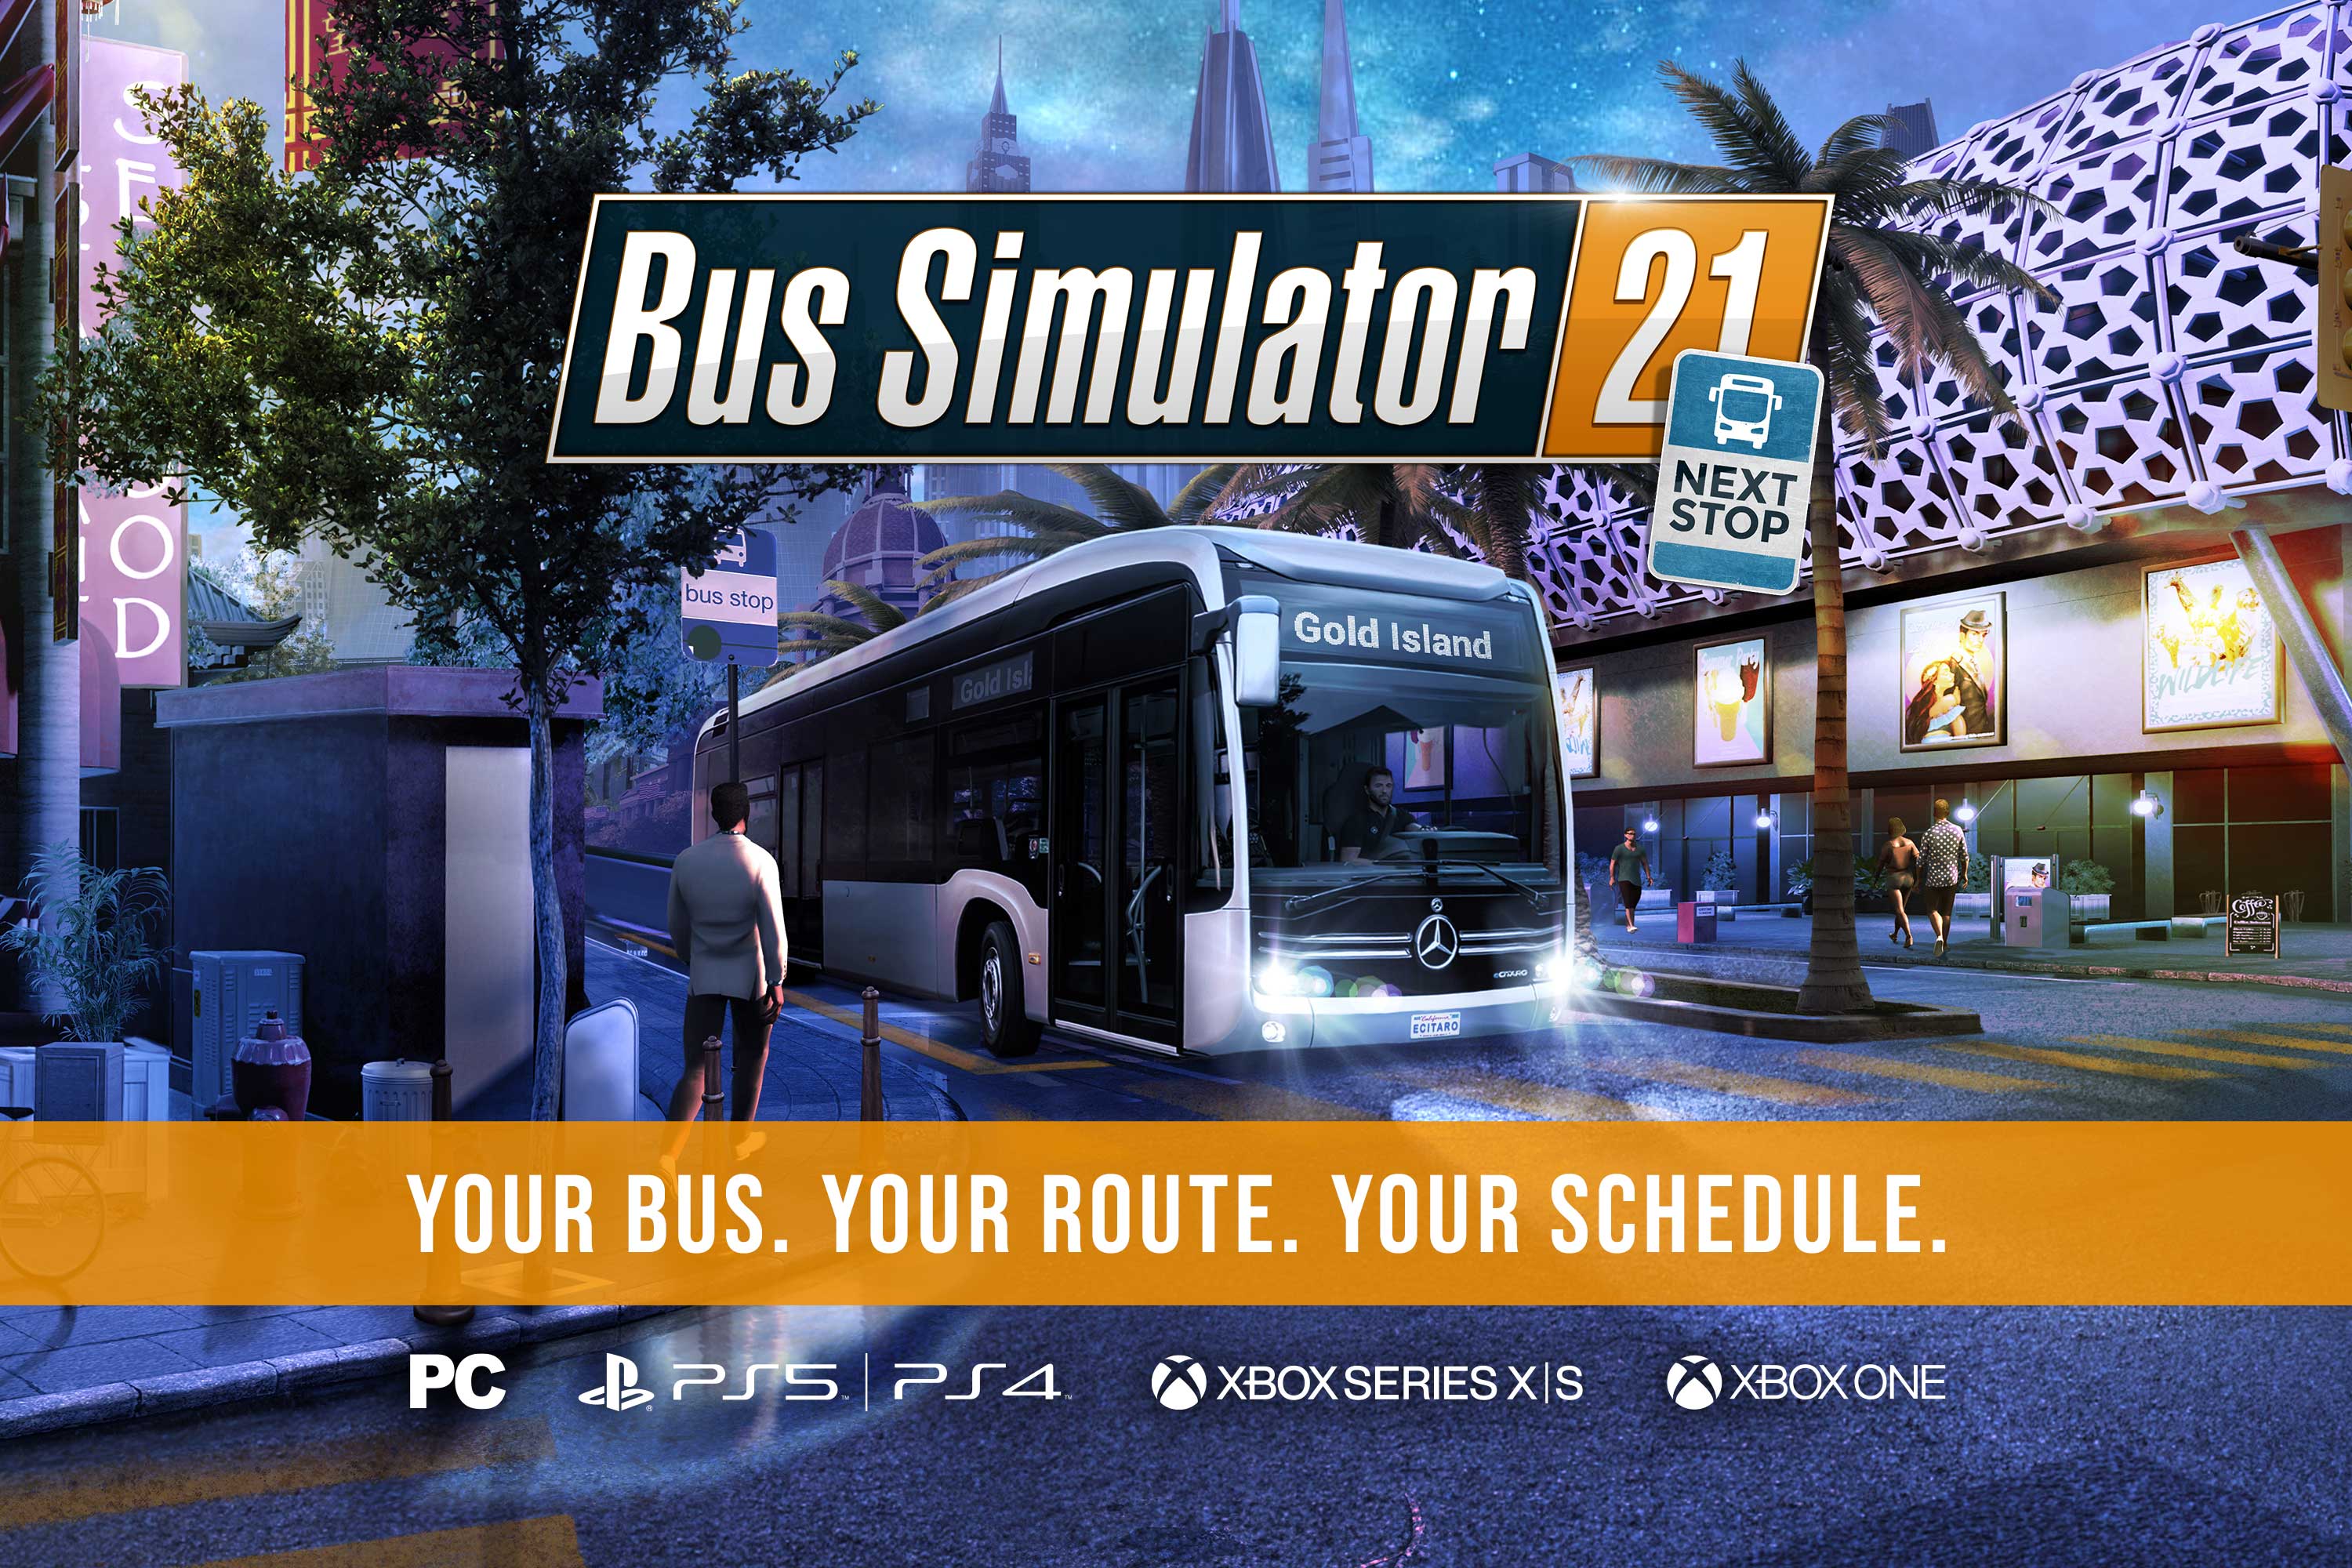 fernbus simulator not.showing clearly on my laptop fix